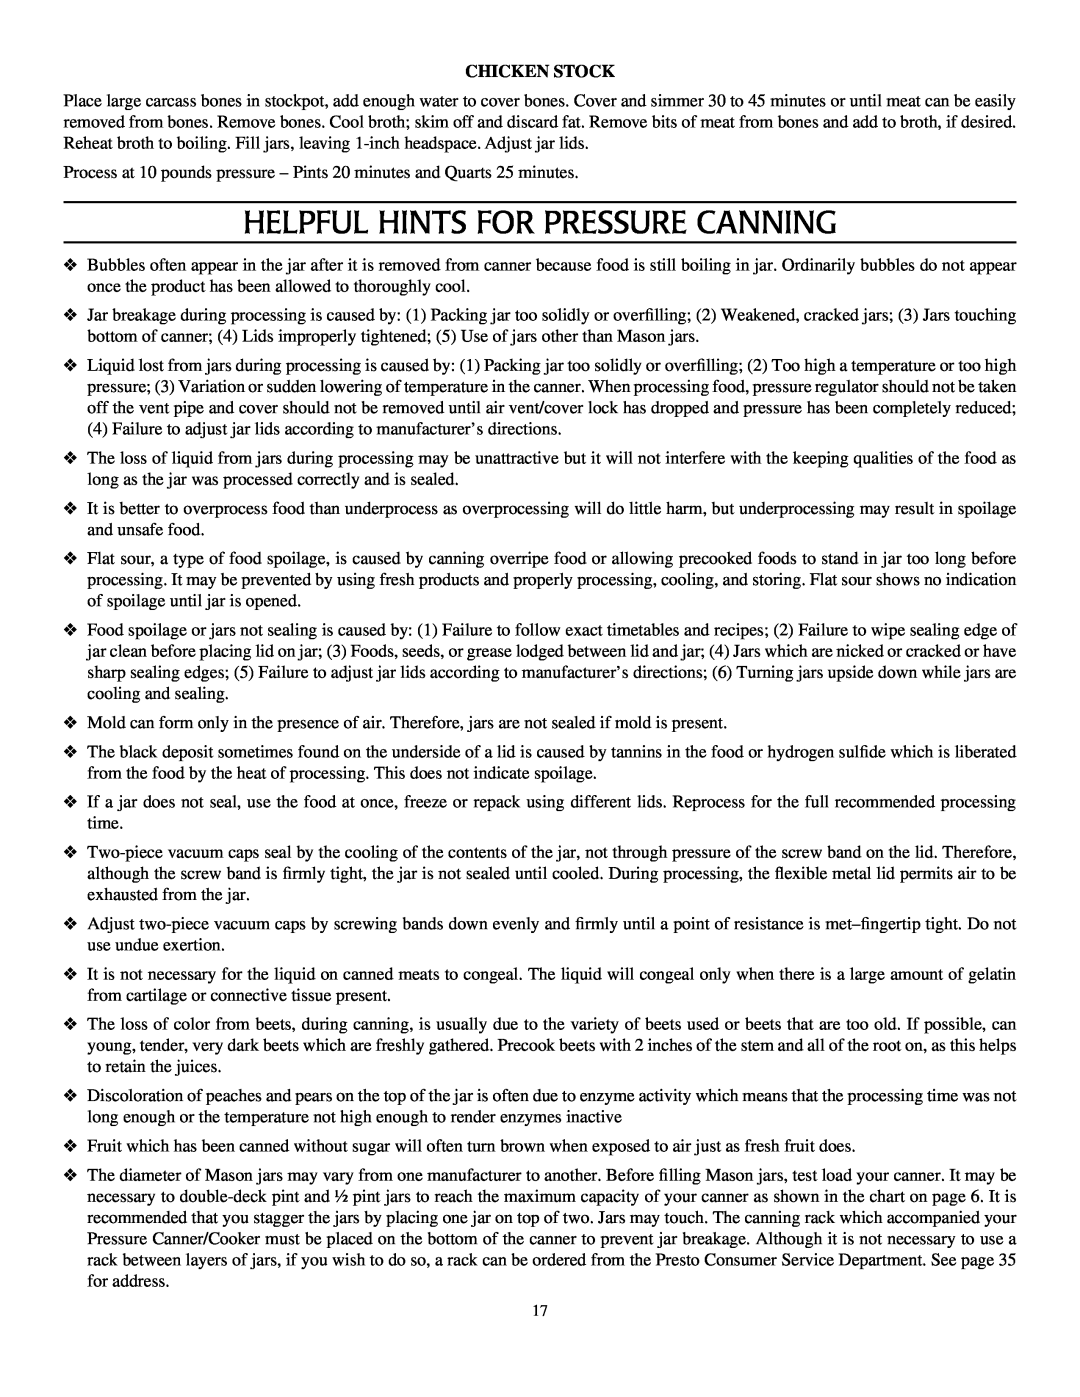 Presto Pressure Canner and Cooker warranty Helpful Hints For Pressure Canning, Chicken Stock 